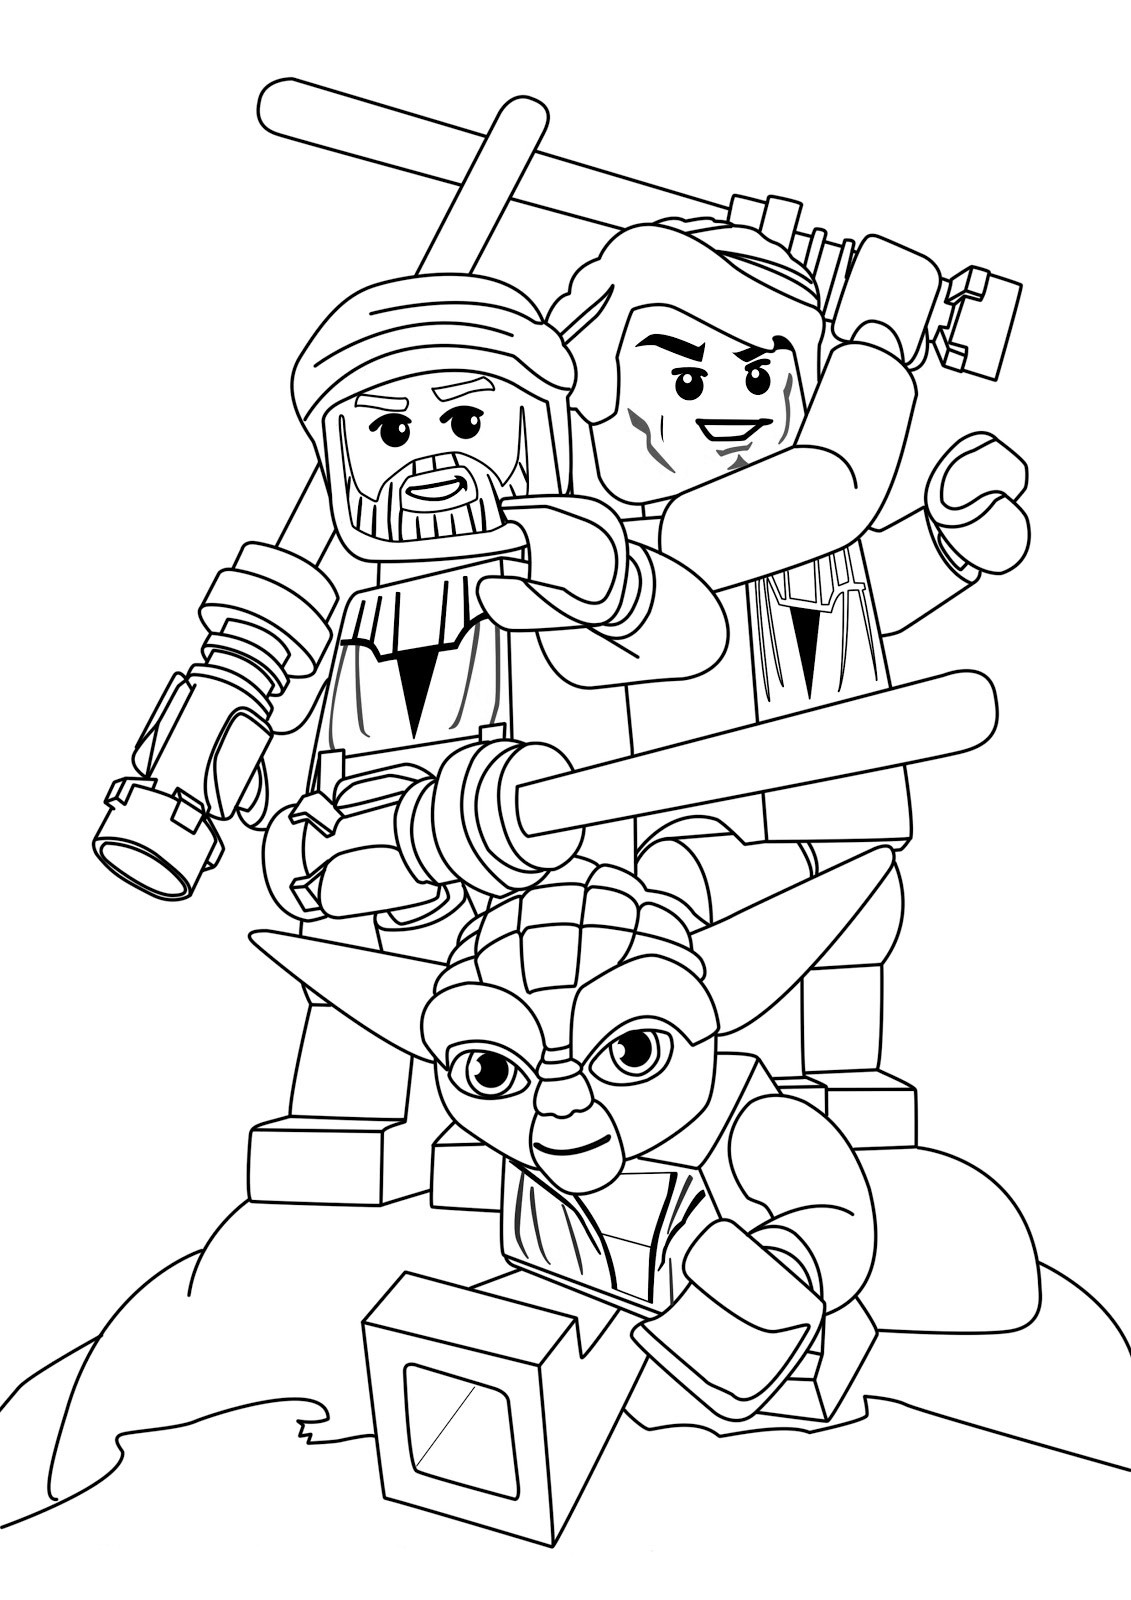 Lego Star Wars Printable Coloring Pages
 Lego Star Wars Coloring Pages Best Coloring Pages For Kids